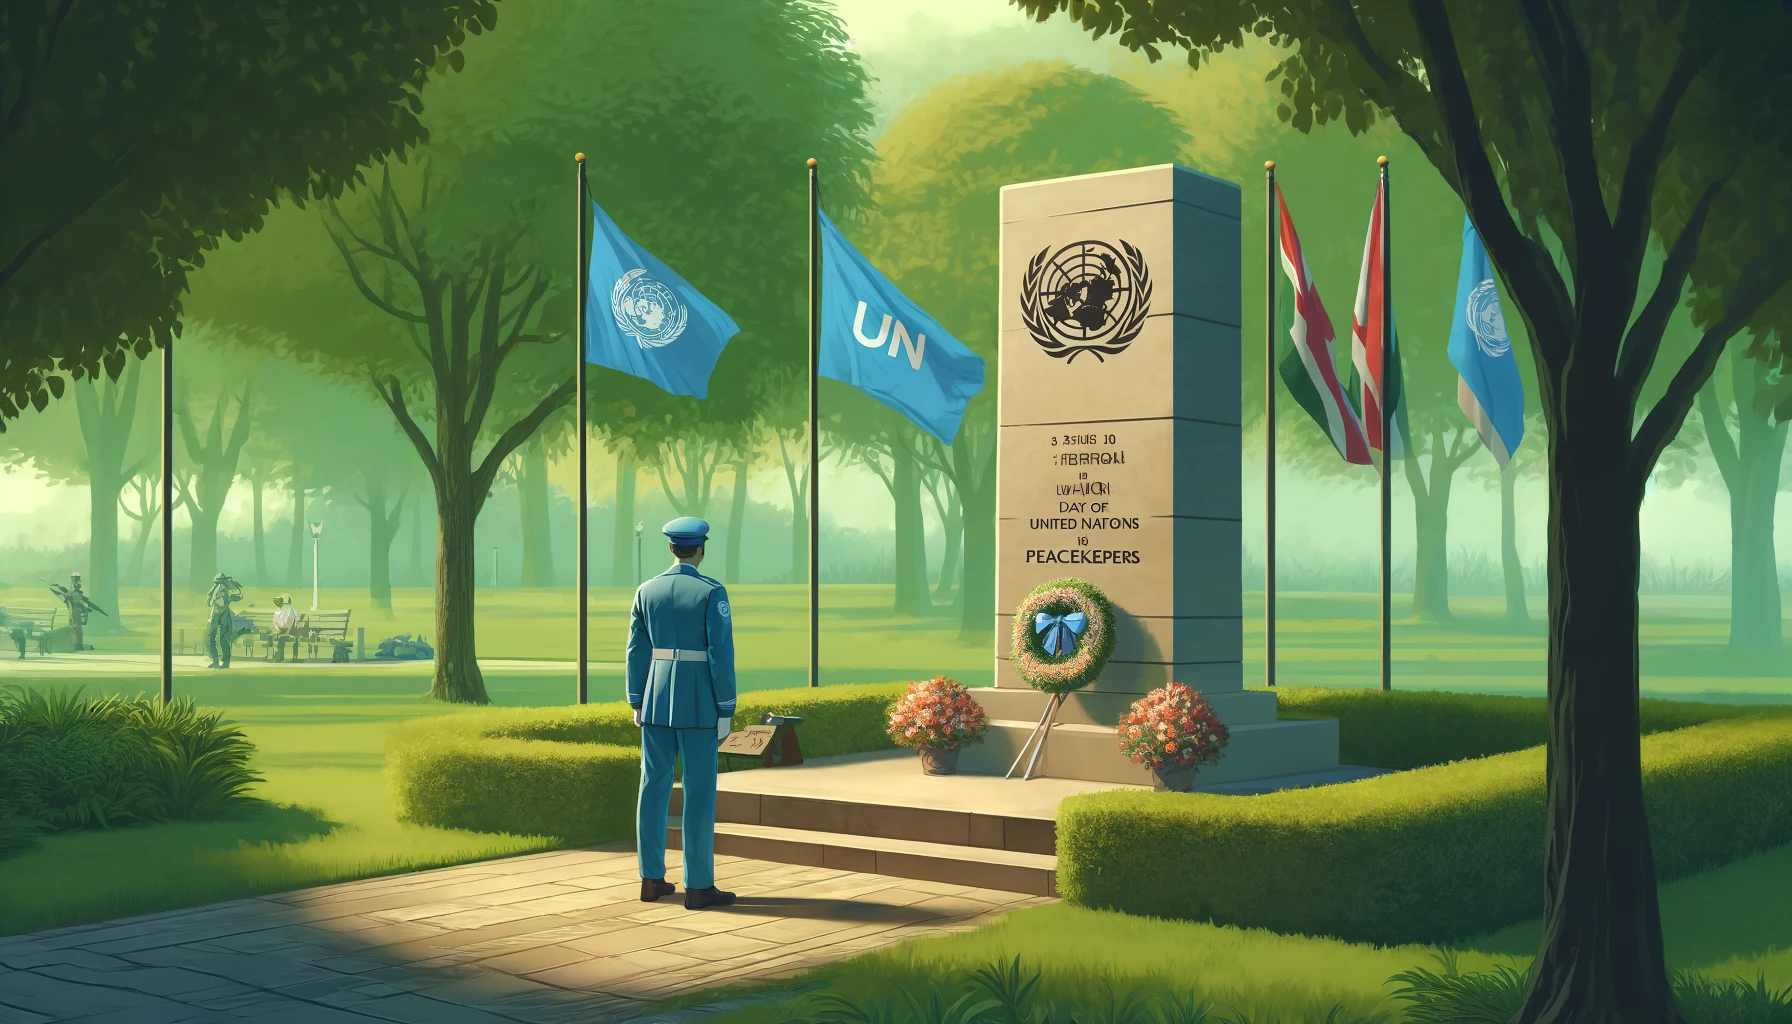 Inspirational Greetings for International Day of UN Peacekeepers